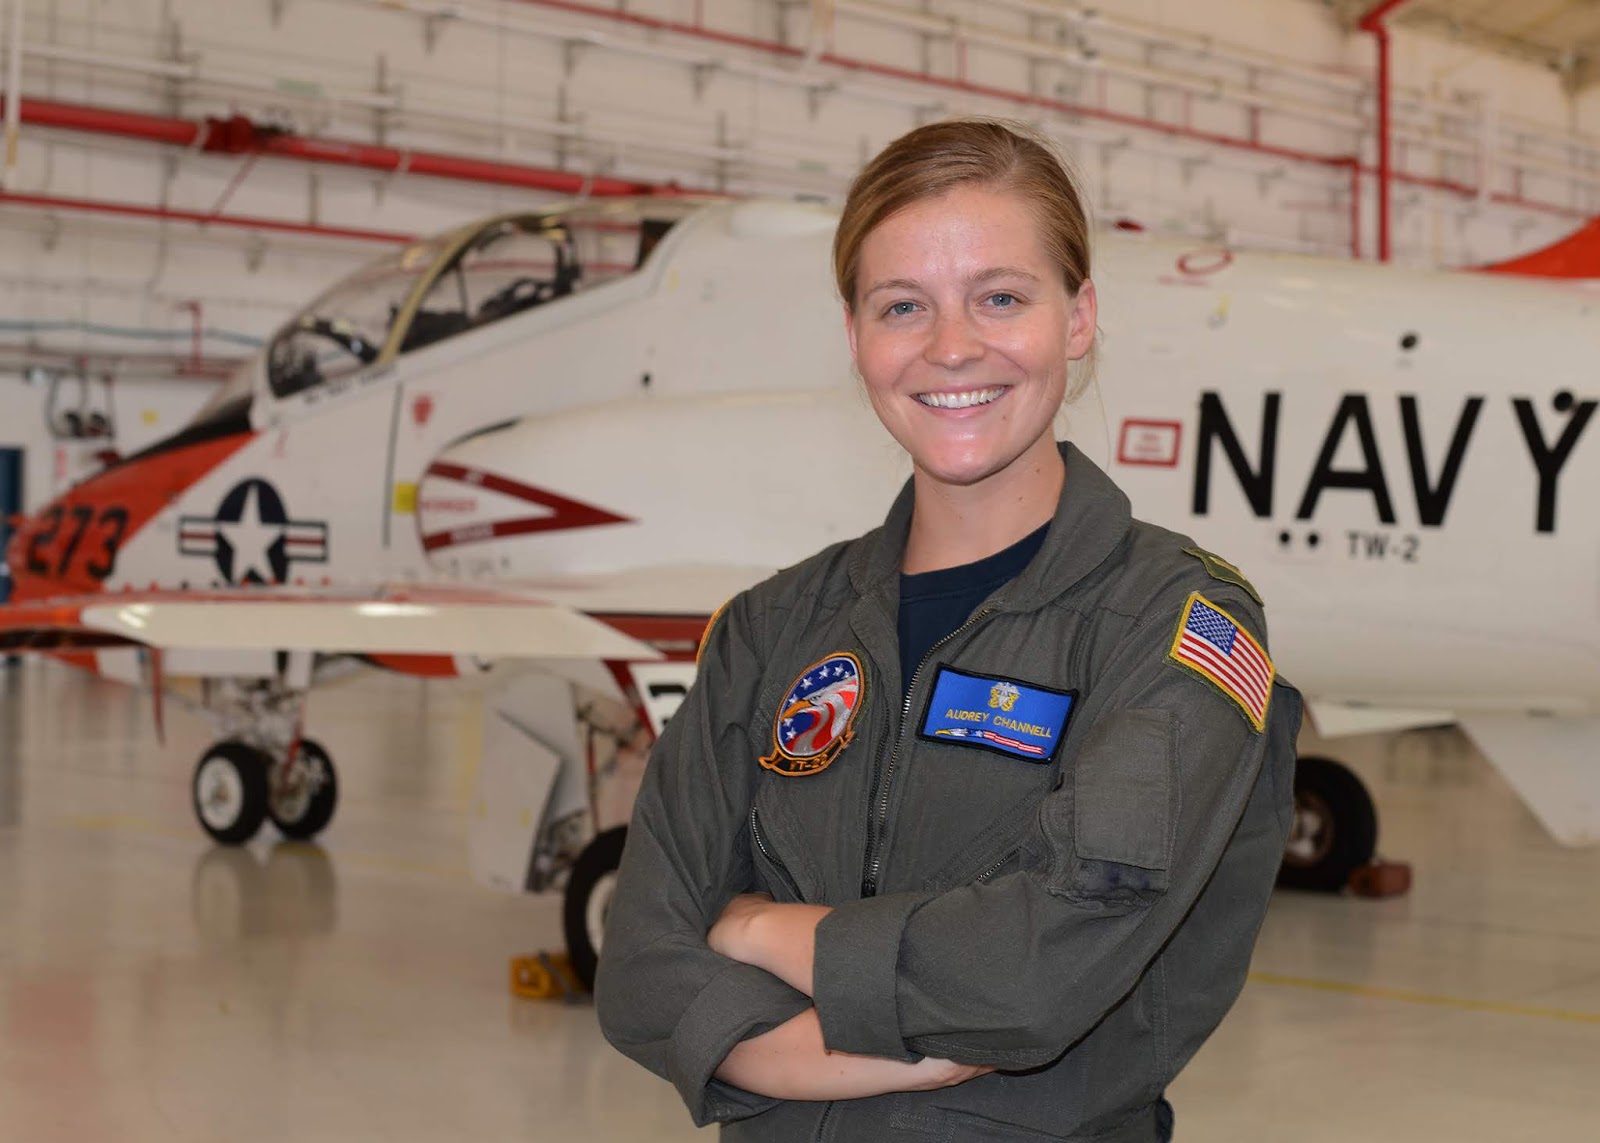 American Connections Media Outreach: Cary native trains to serve